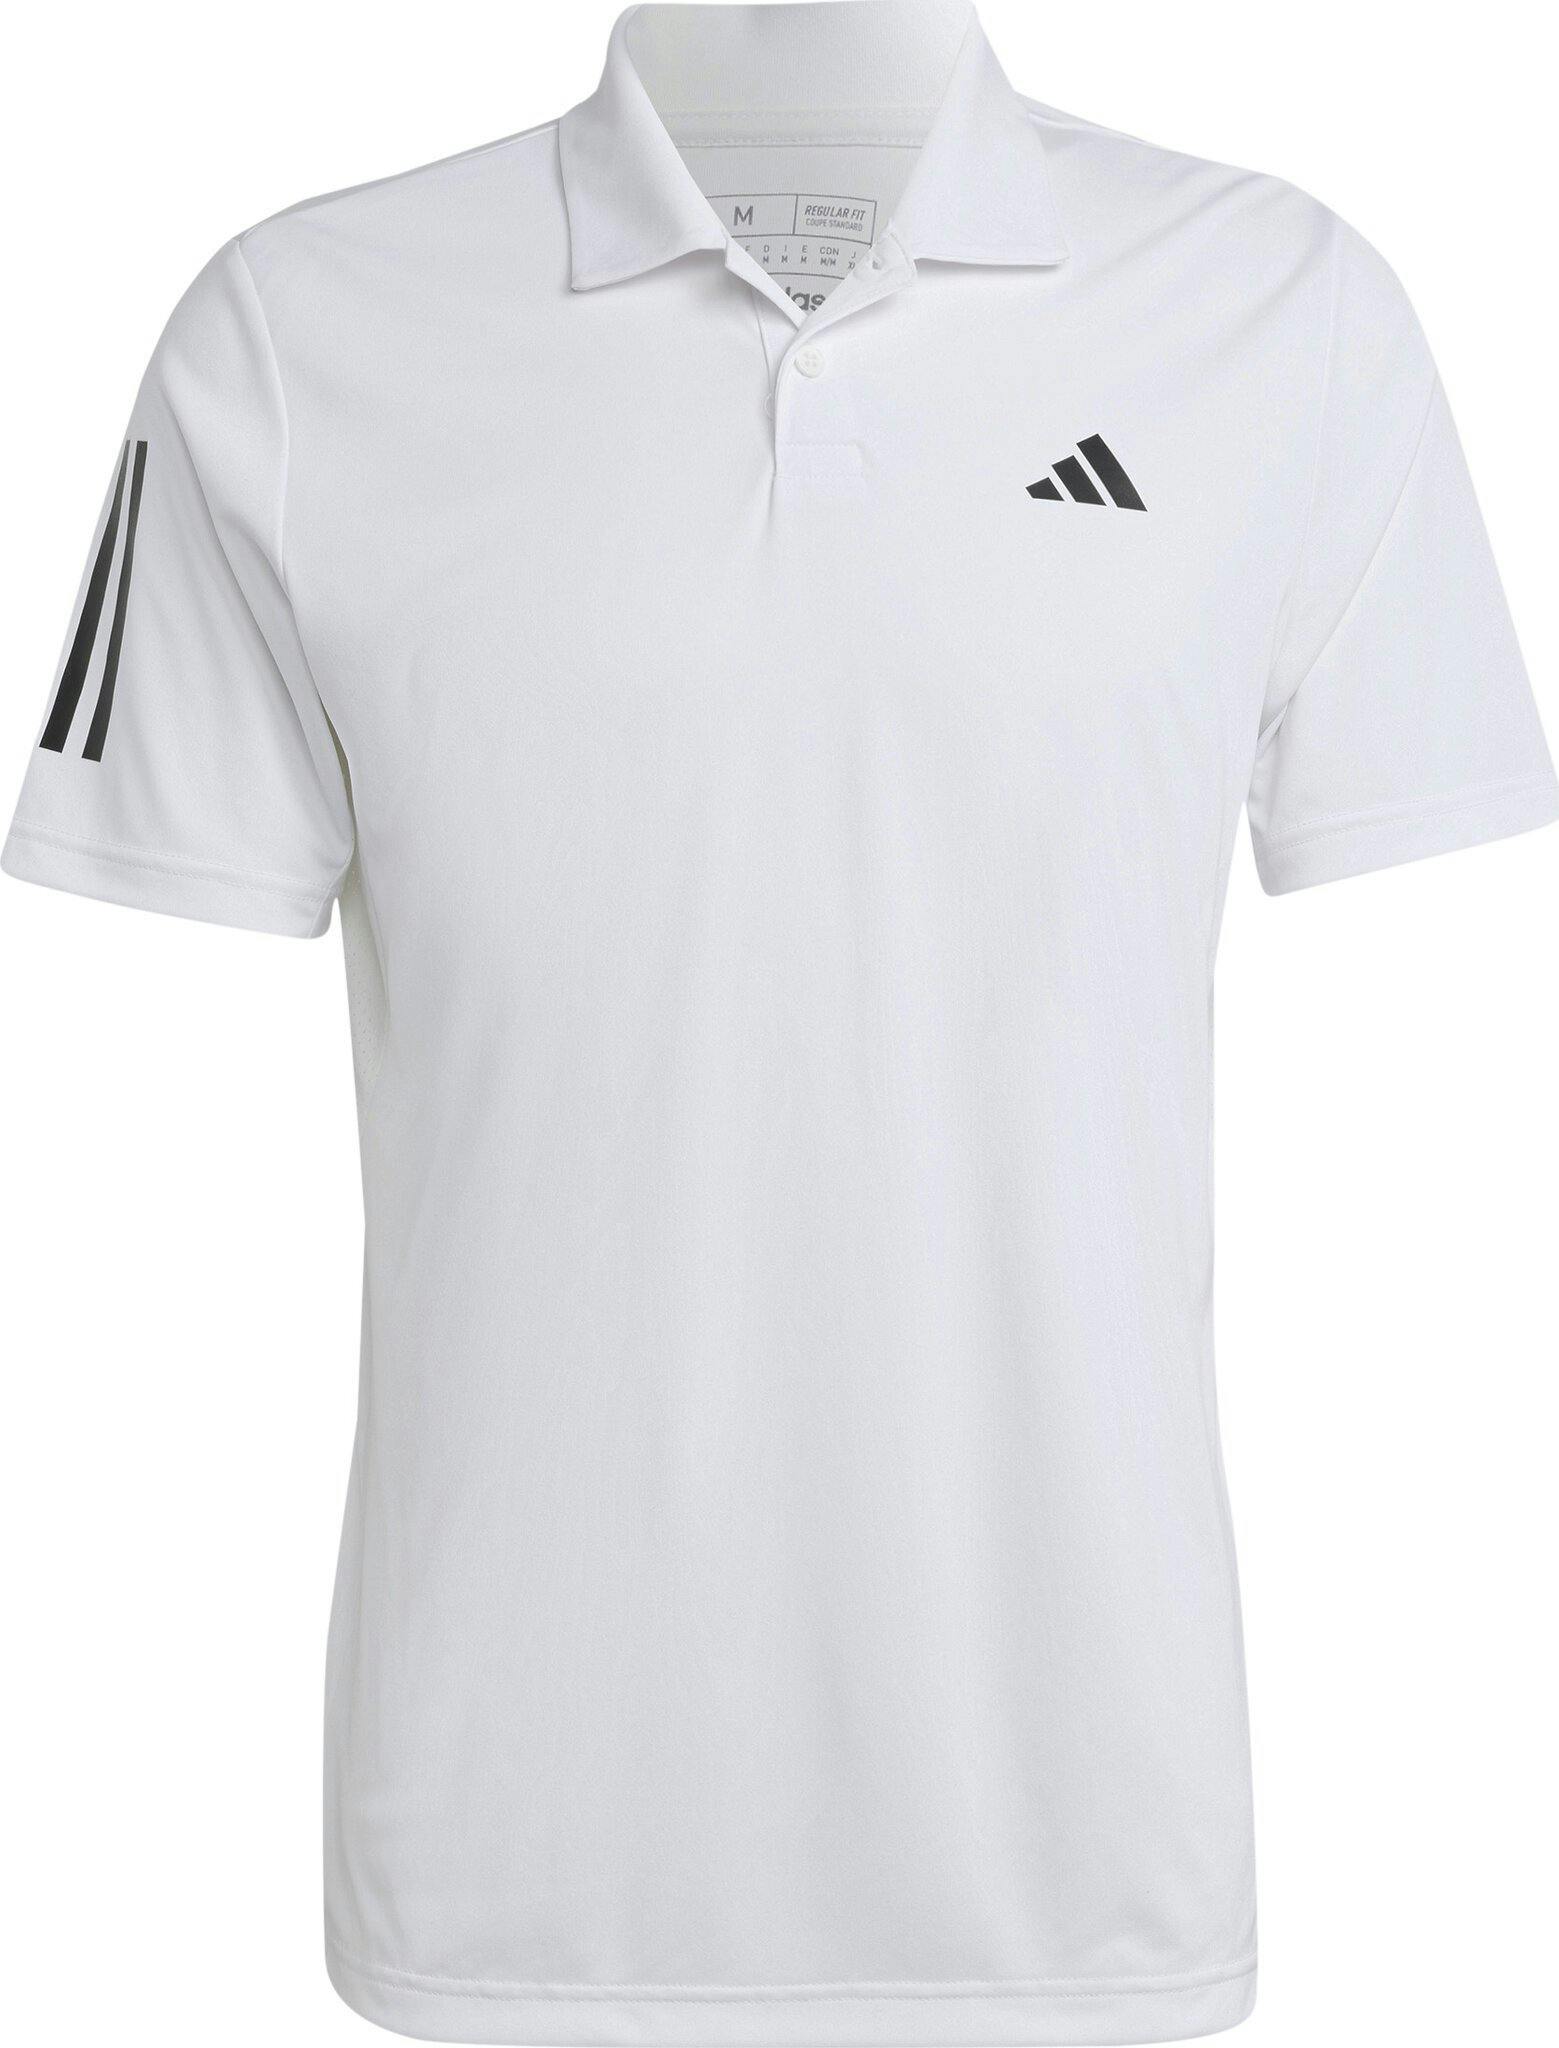 Product image for Club 3-Stripes Tennis Polo Shirt - Men's